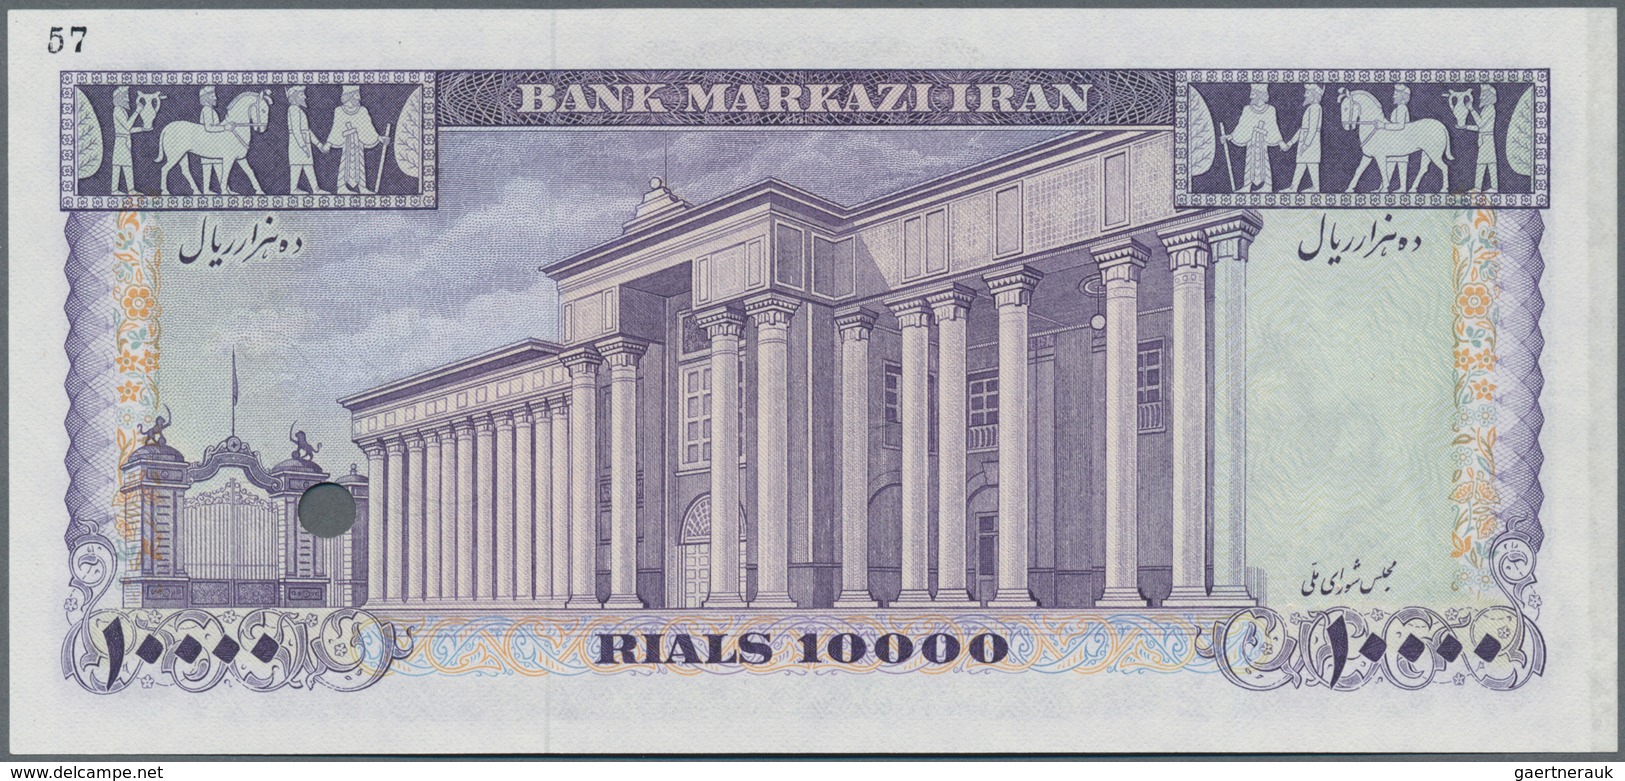 Iran: 10.000 Rials ND(1971) Color Trial Specimen P. 96cts, Highly Raare Note With Zero Serial Number - Iran